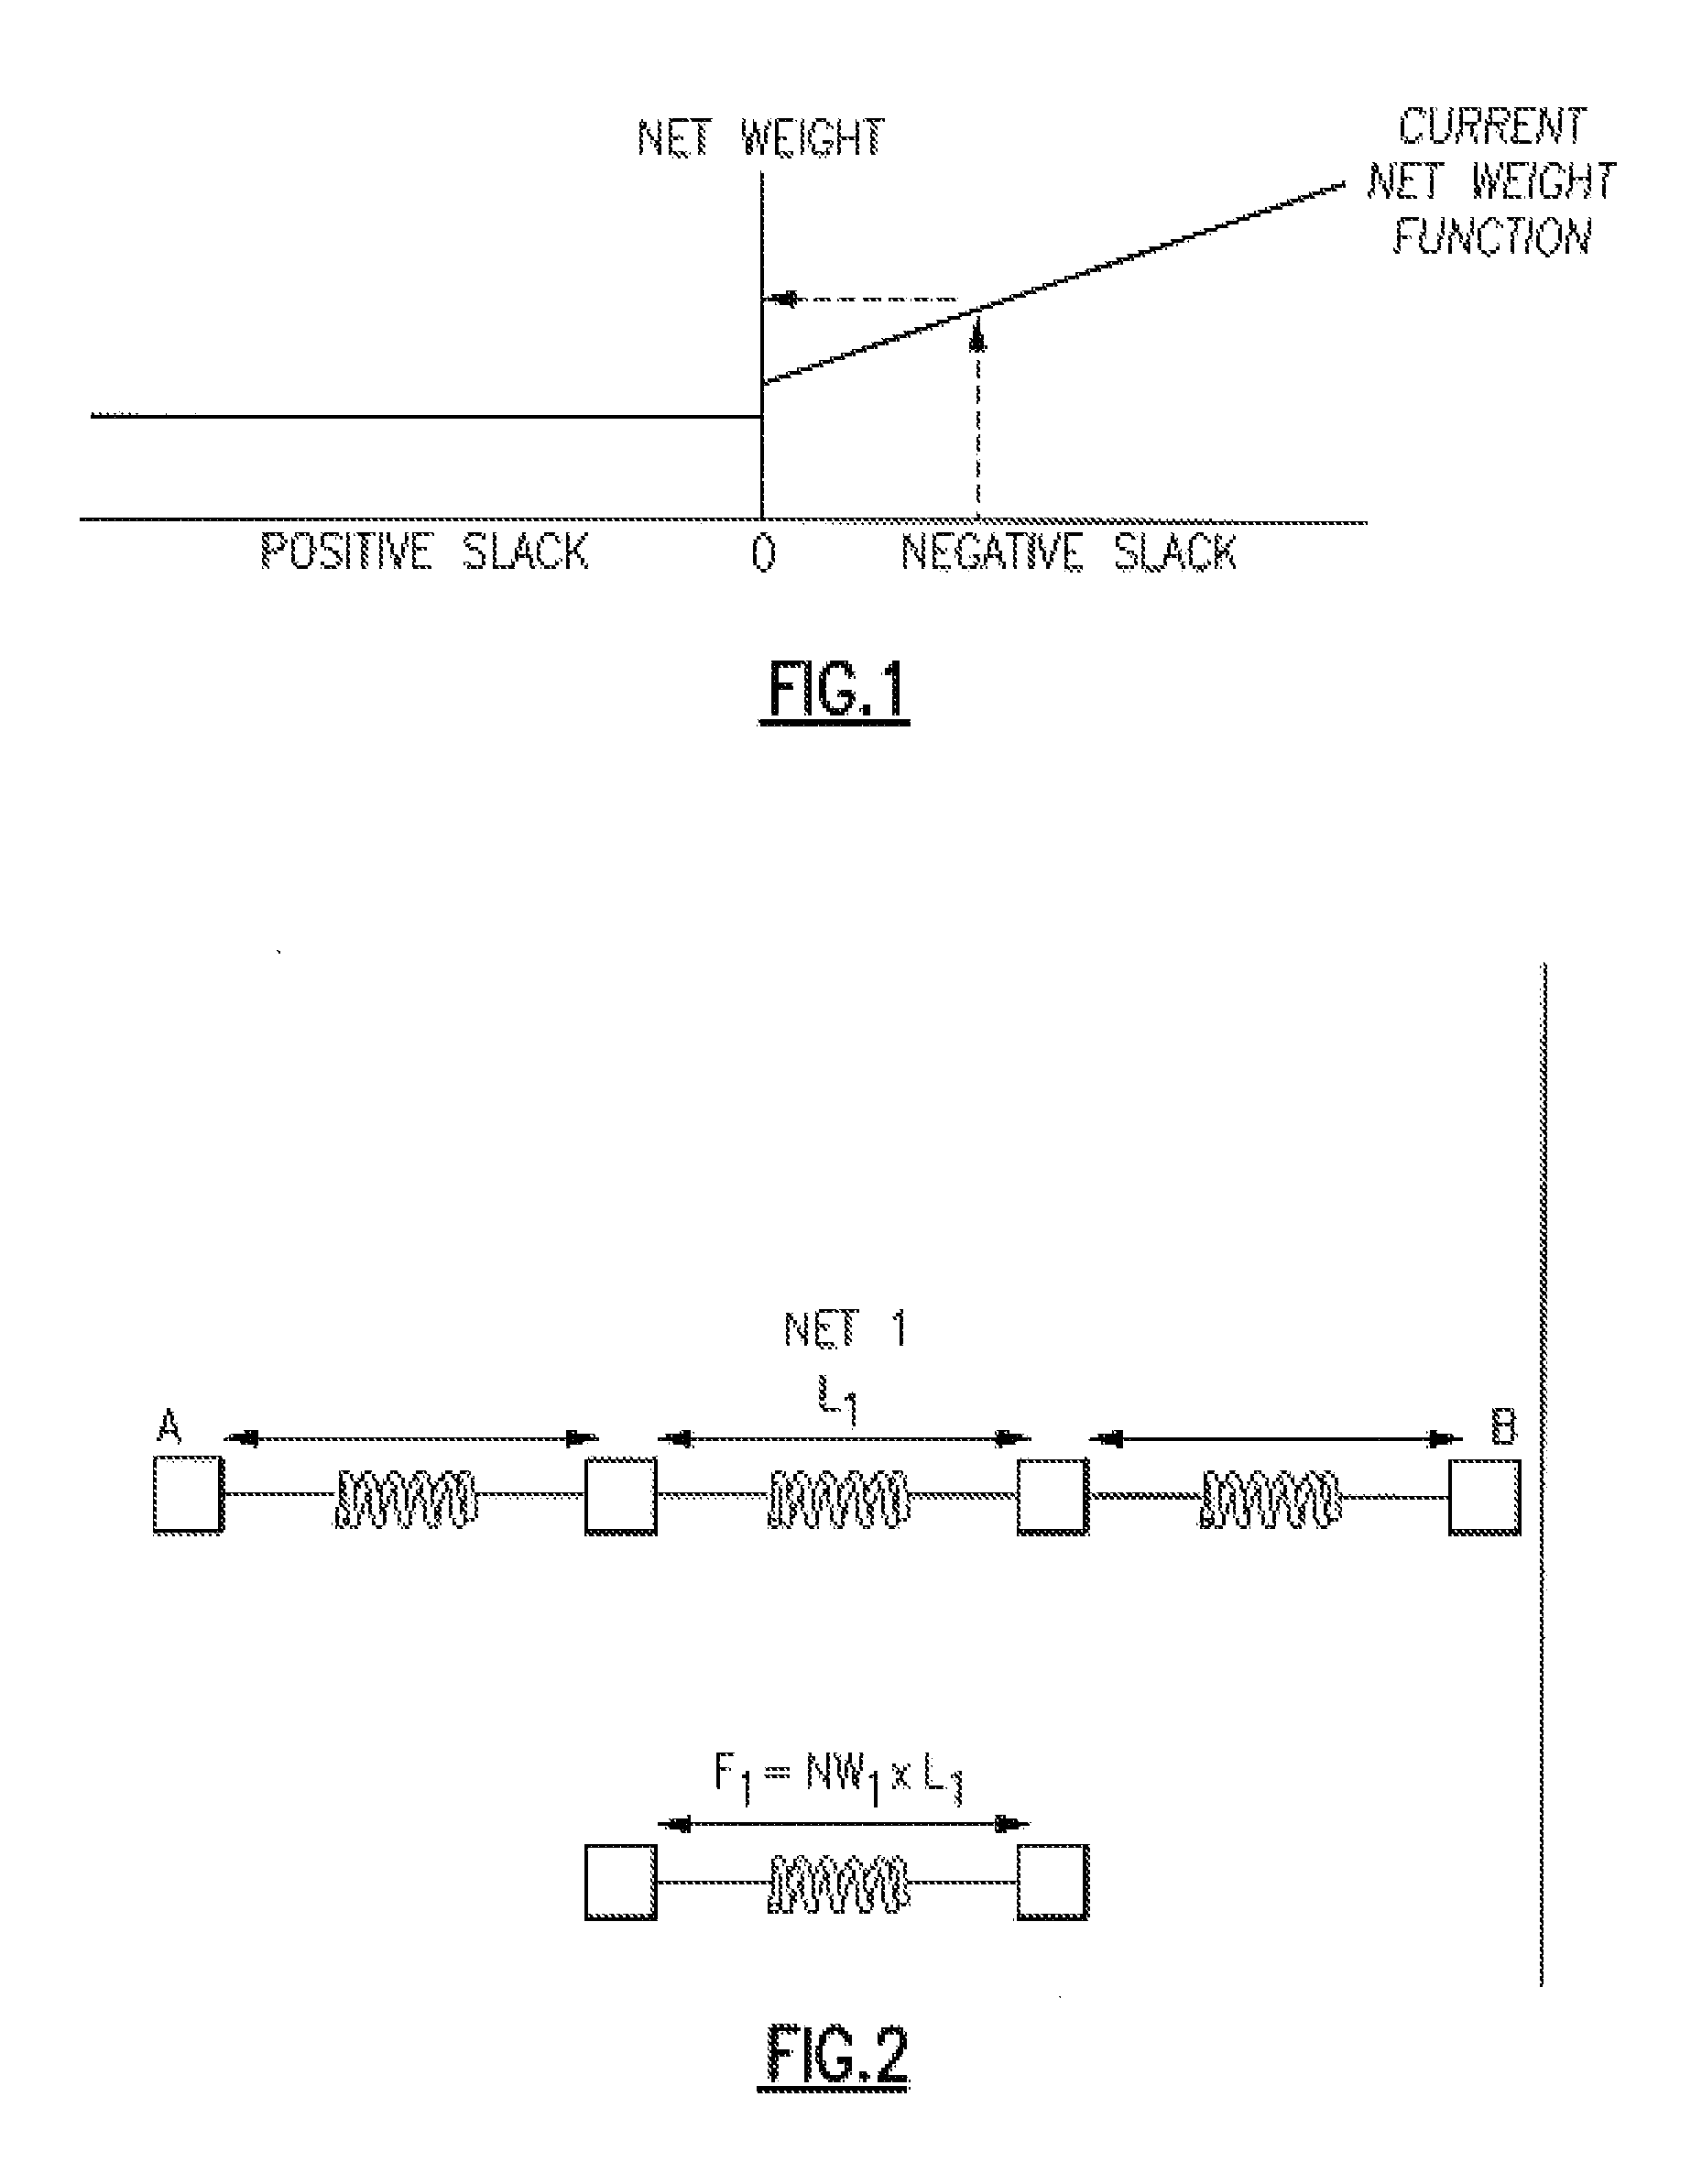 Integrated Circuit Implementing Improved Timing Driven Placements of Elements of a Circuit